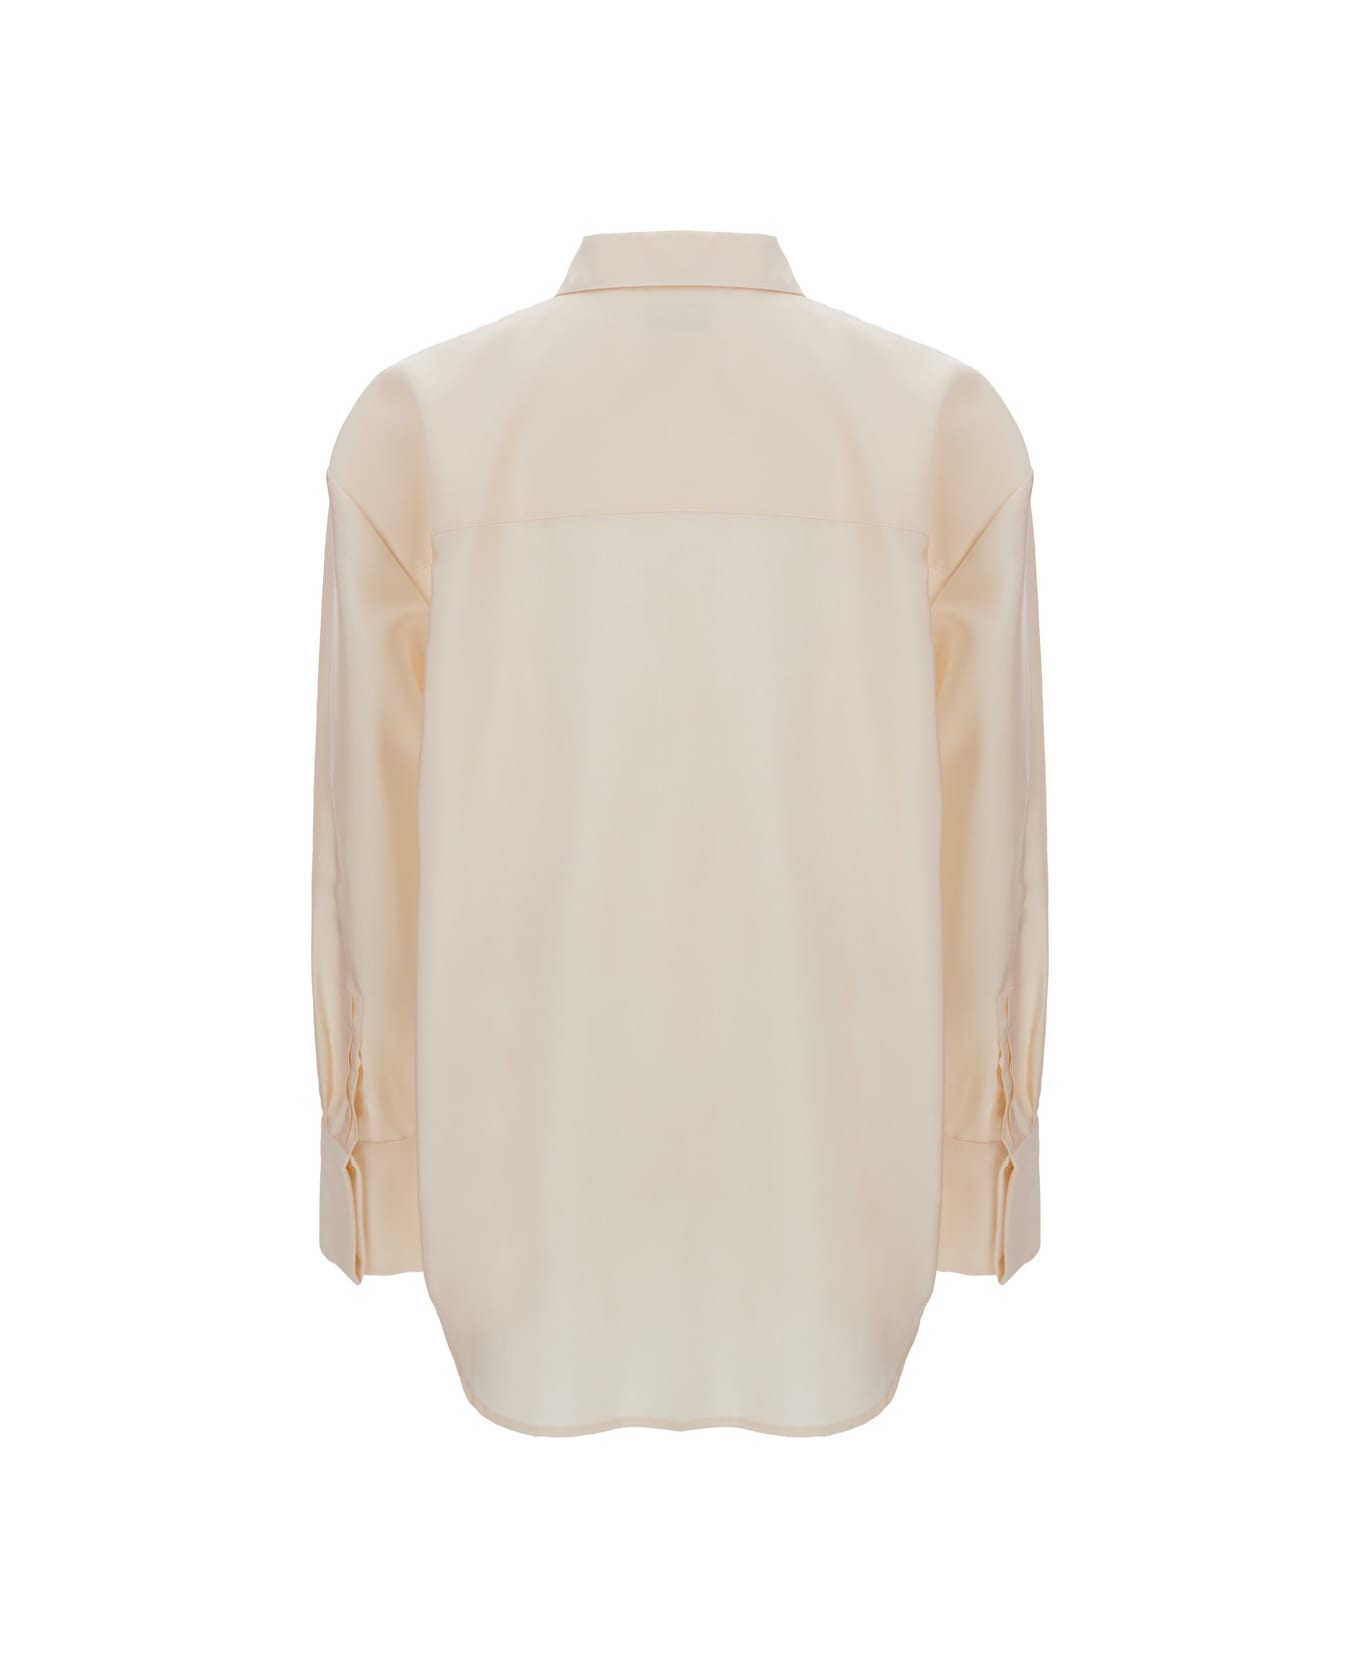 Saint Laurent Ivory White Buttoned Oversized Shirt In Technical Fabric Man - White